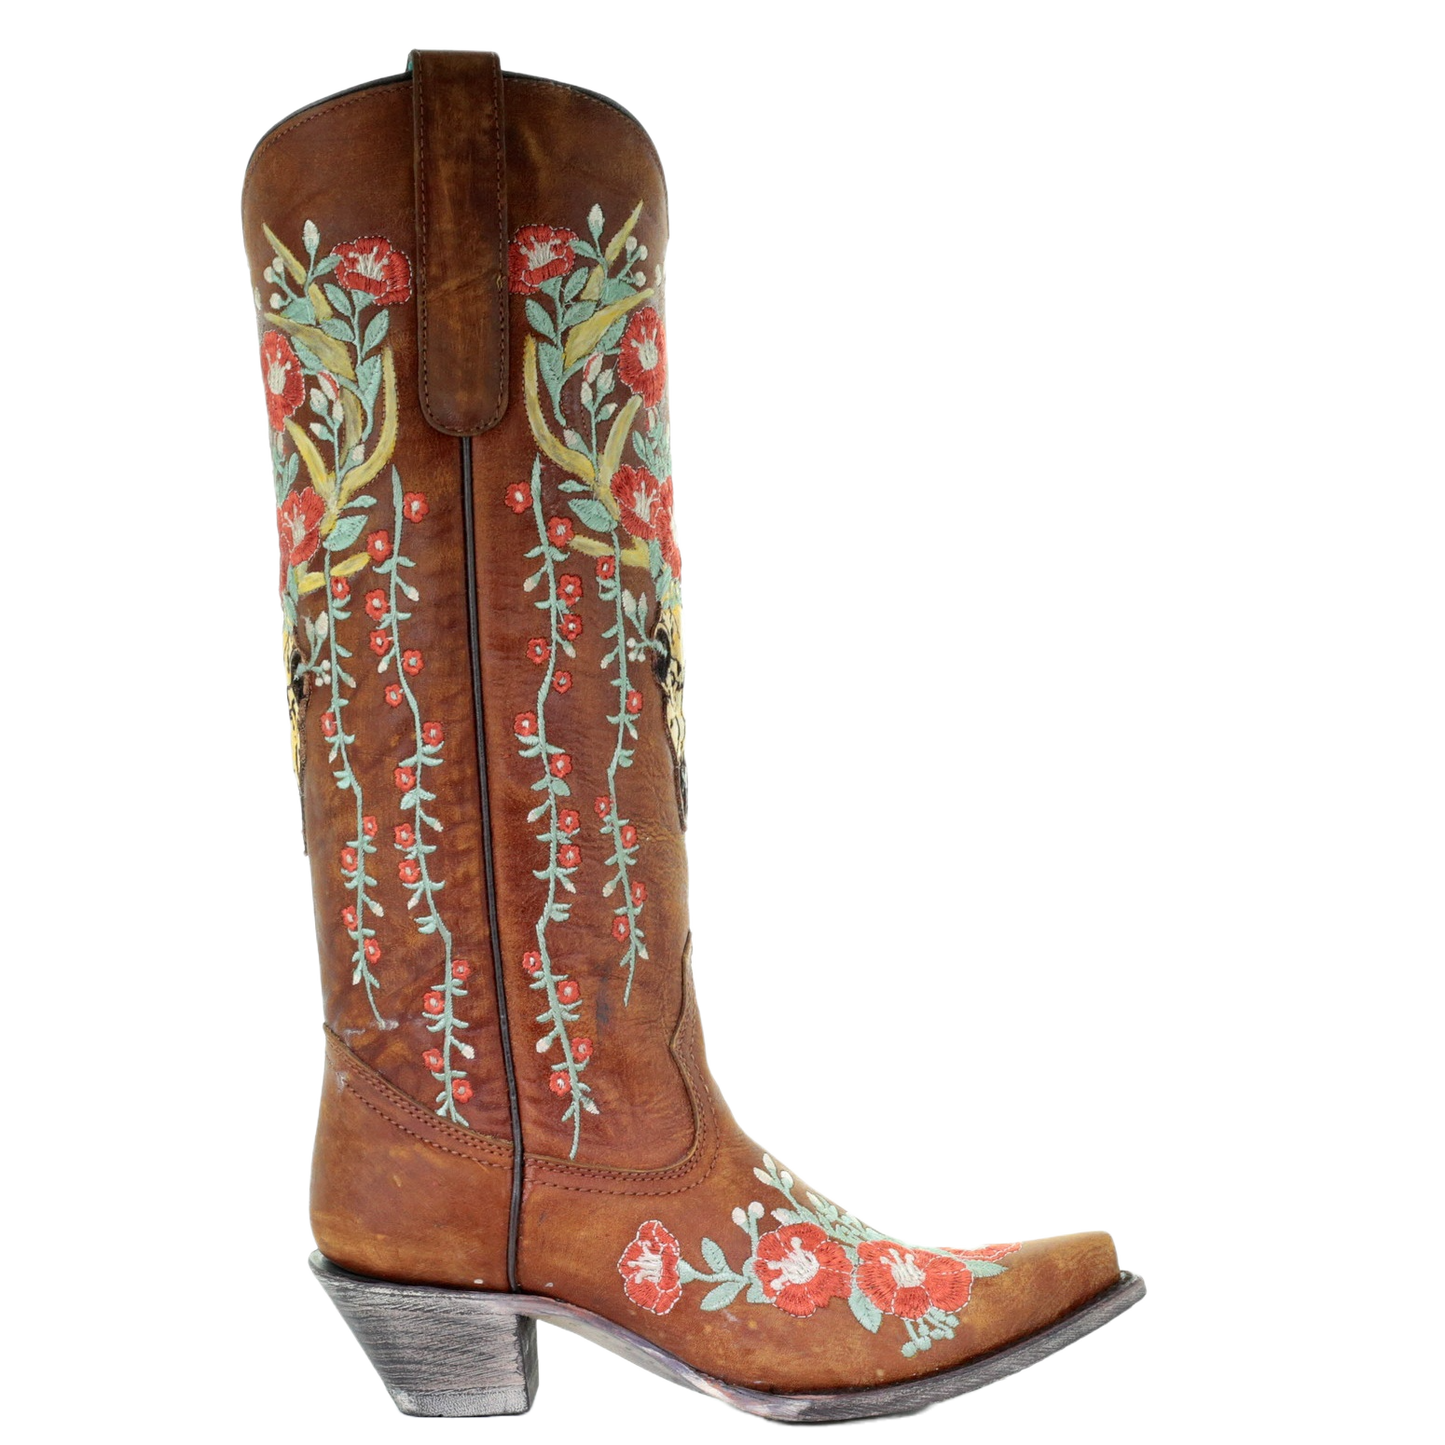 Corral Ladies Juliet Tan Deer Skull Floral Embroidery Boots A3620